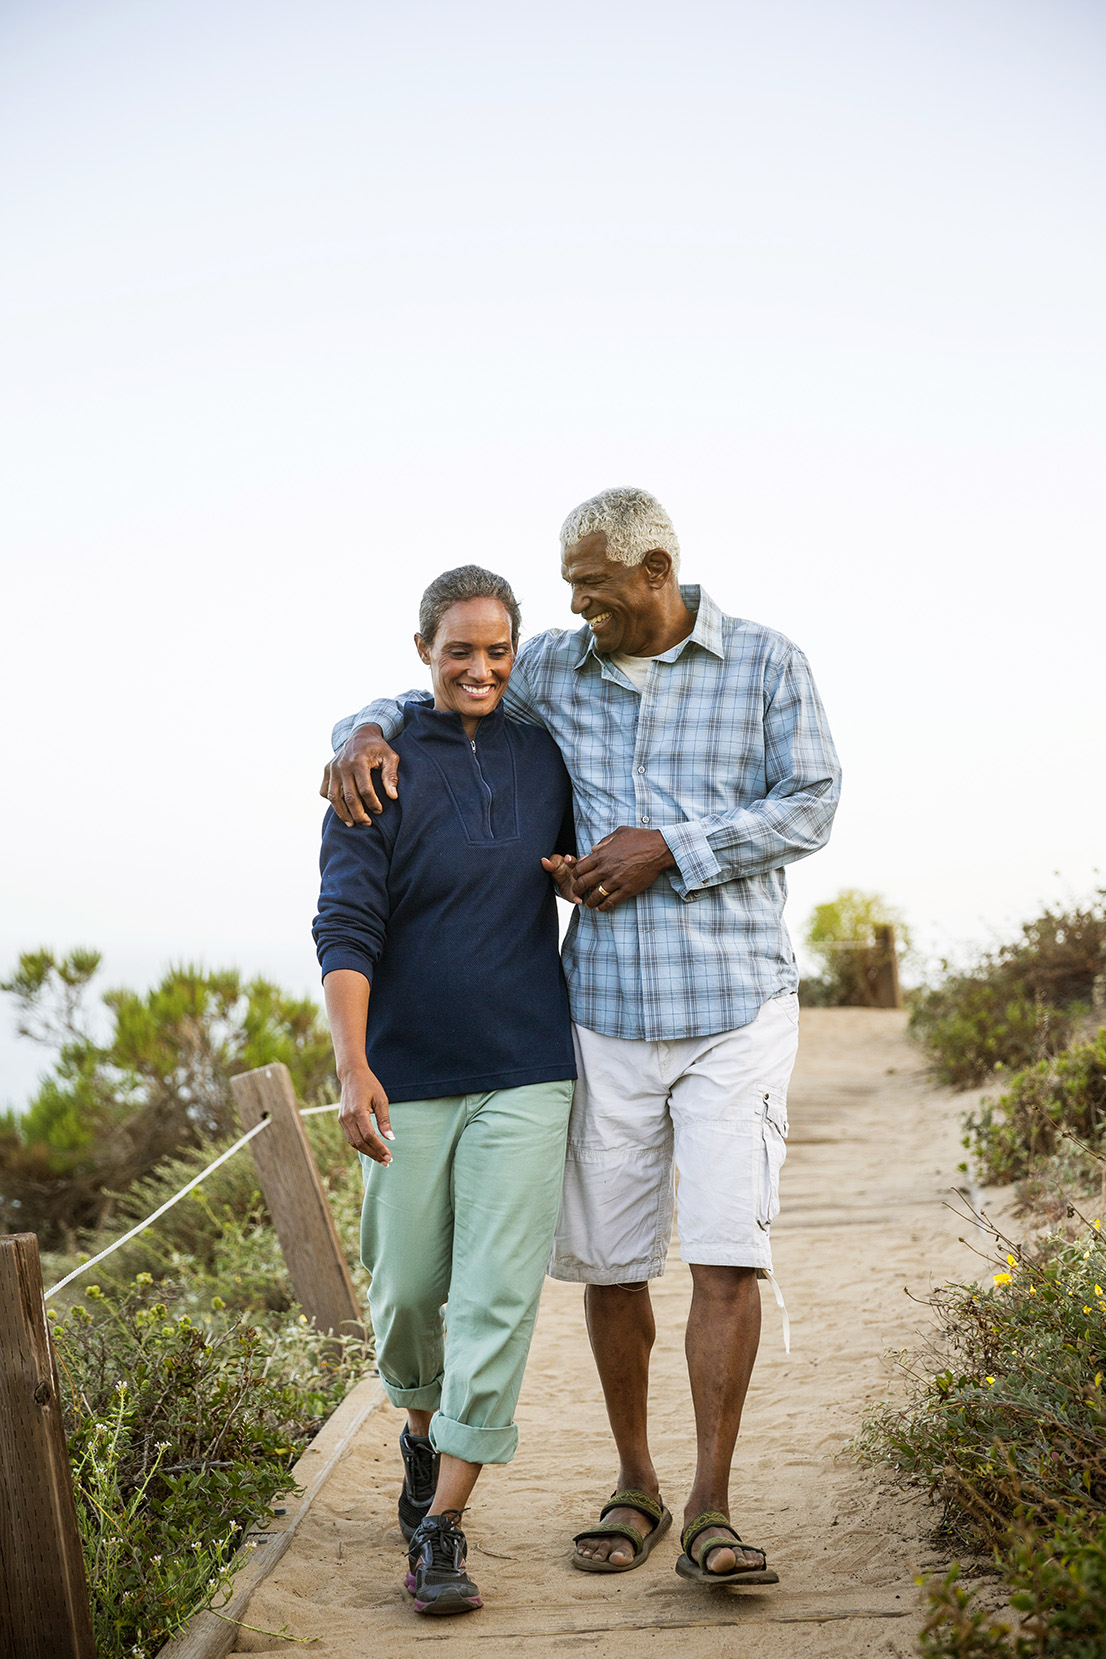 Senior african american couple casually dressed waling together on a boardwalk outdoors near the beach.